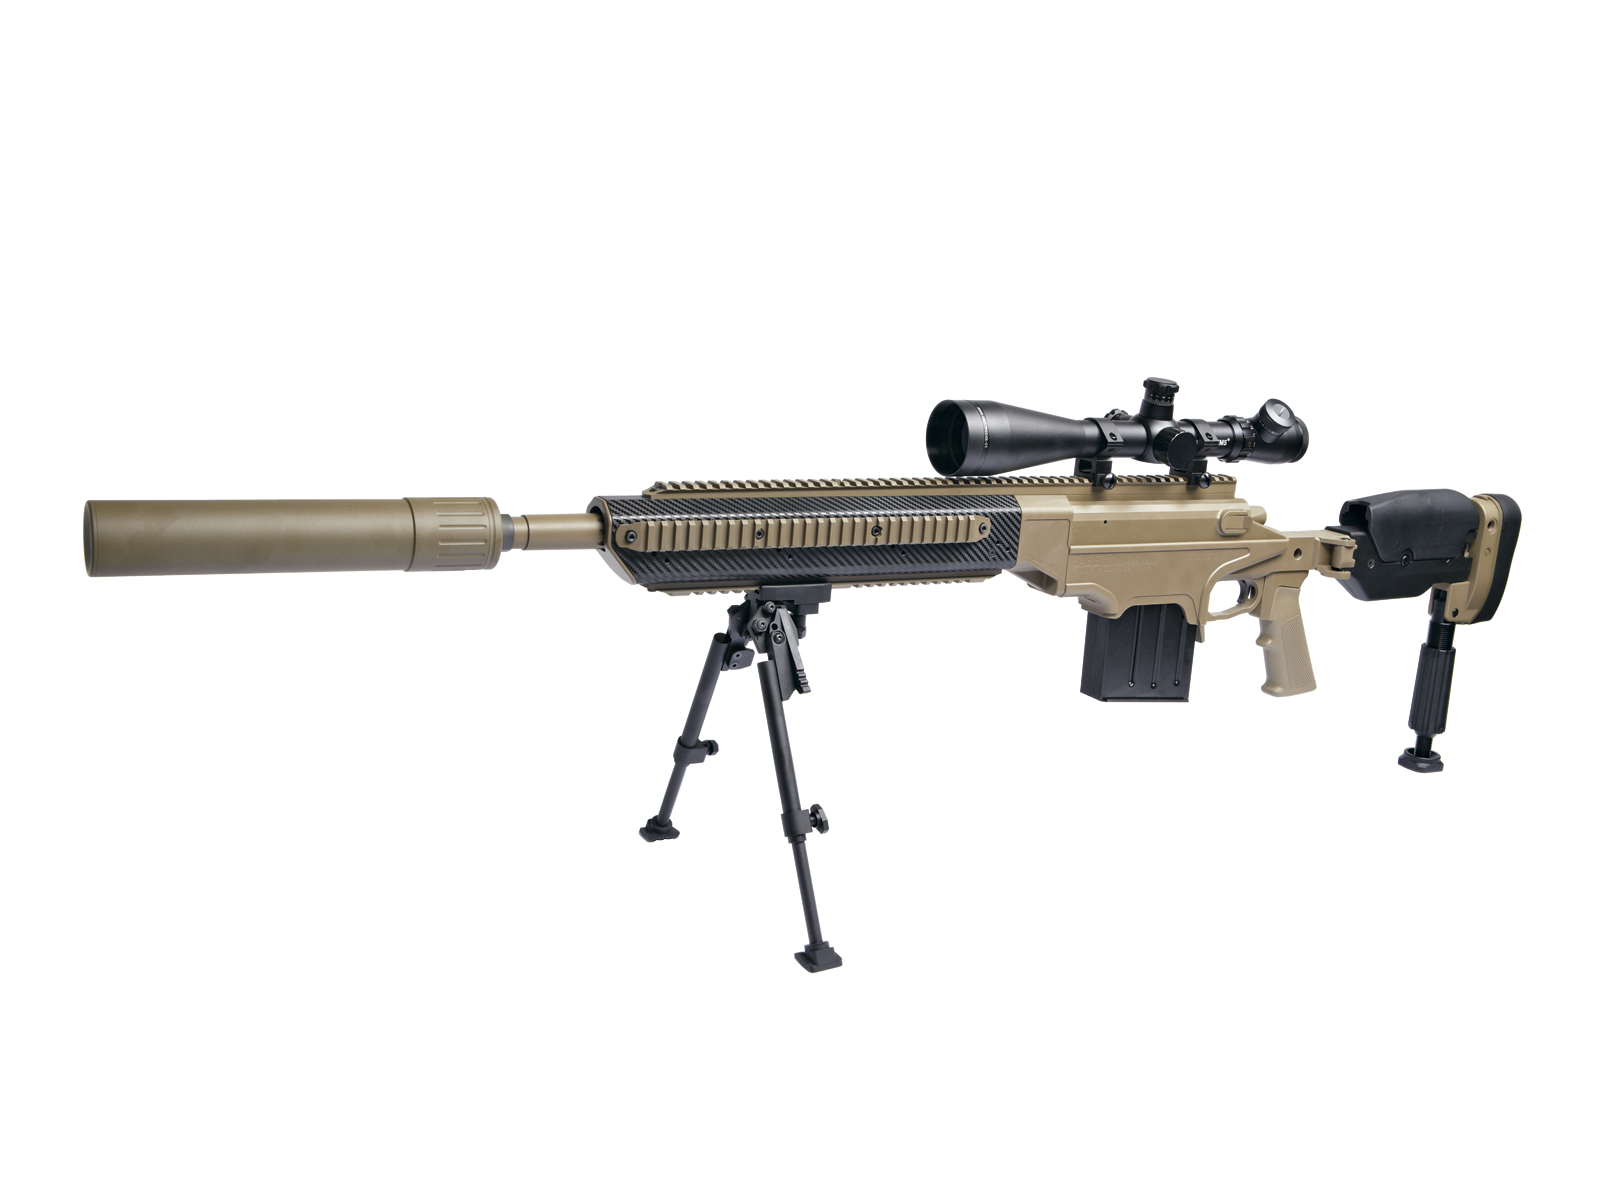 sniper ASG - ASG ASW338LM